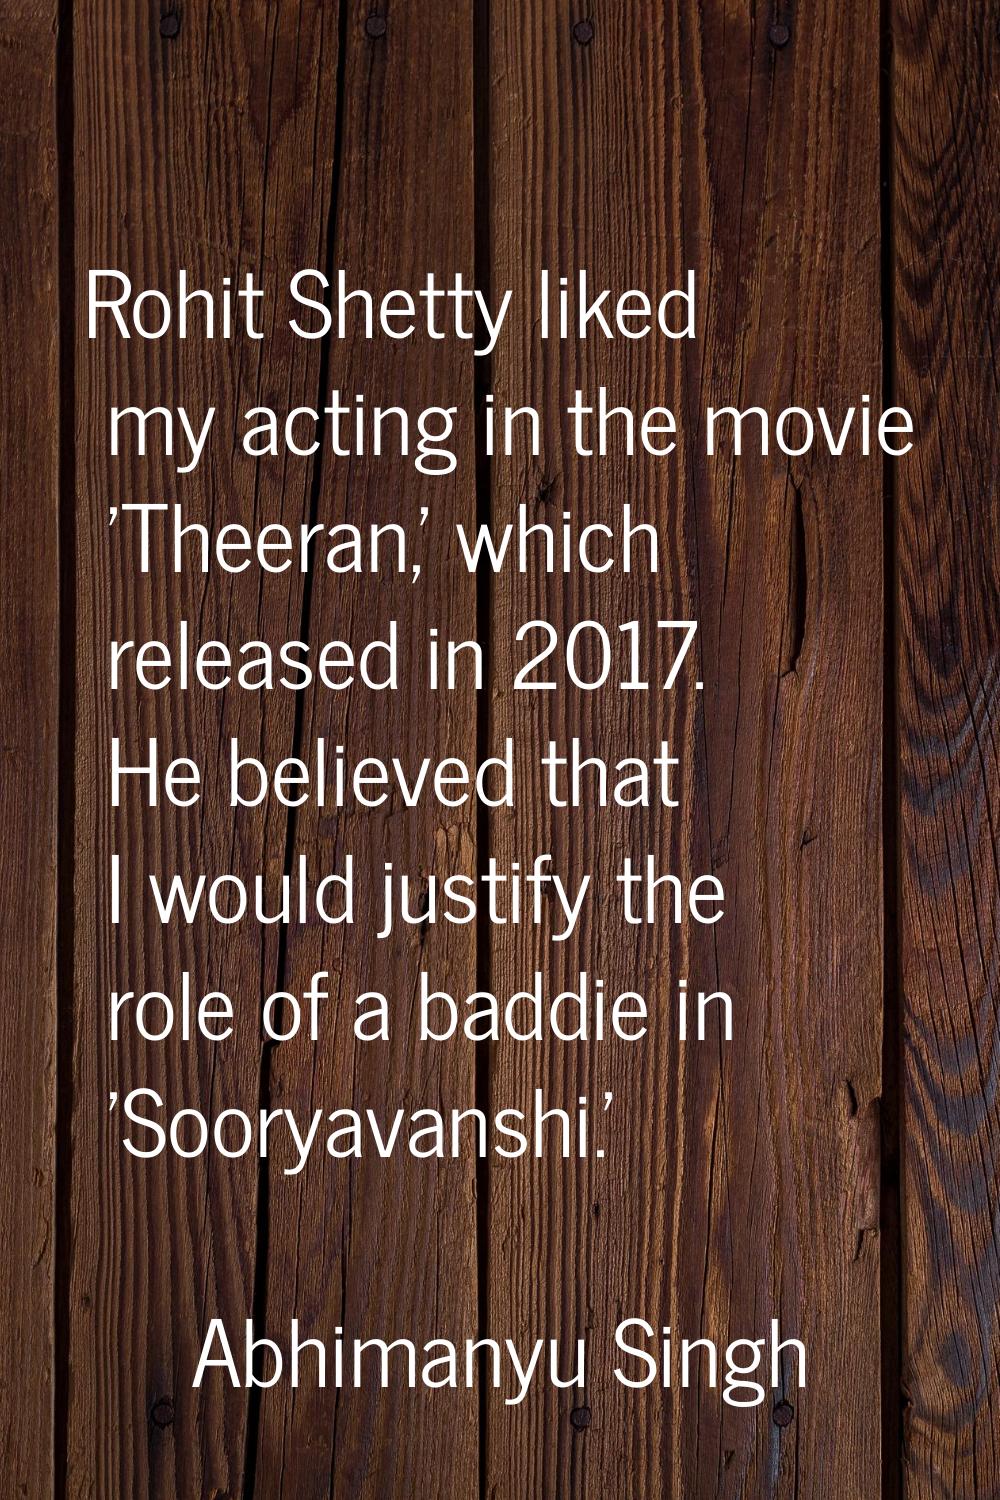 Rohit Shetty liked my acting in the movie 'Theeran,' which released in 2017. He believed that I wou